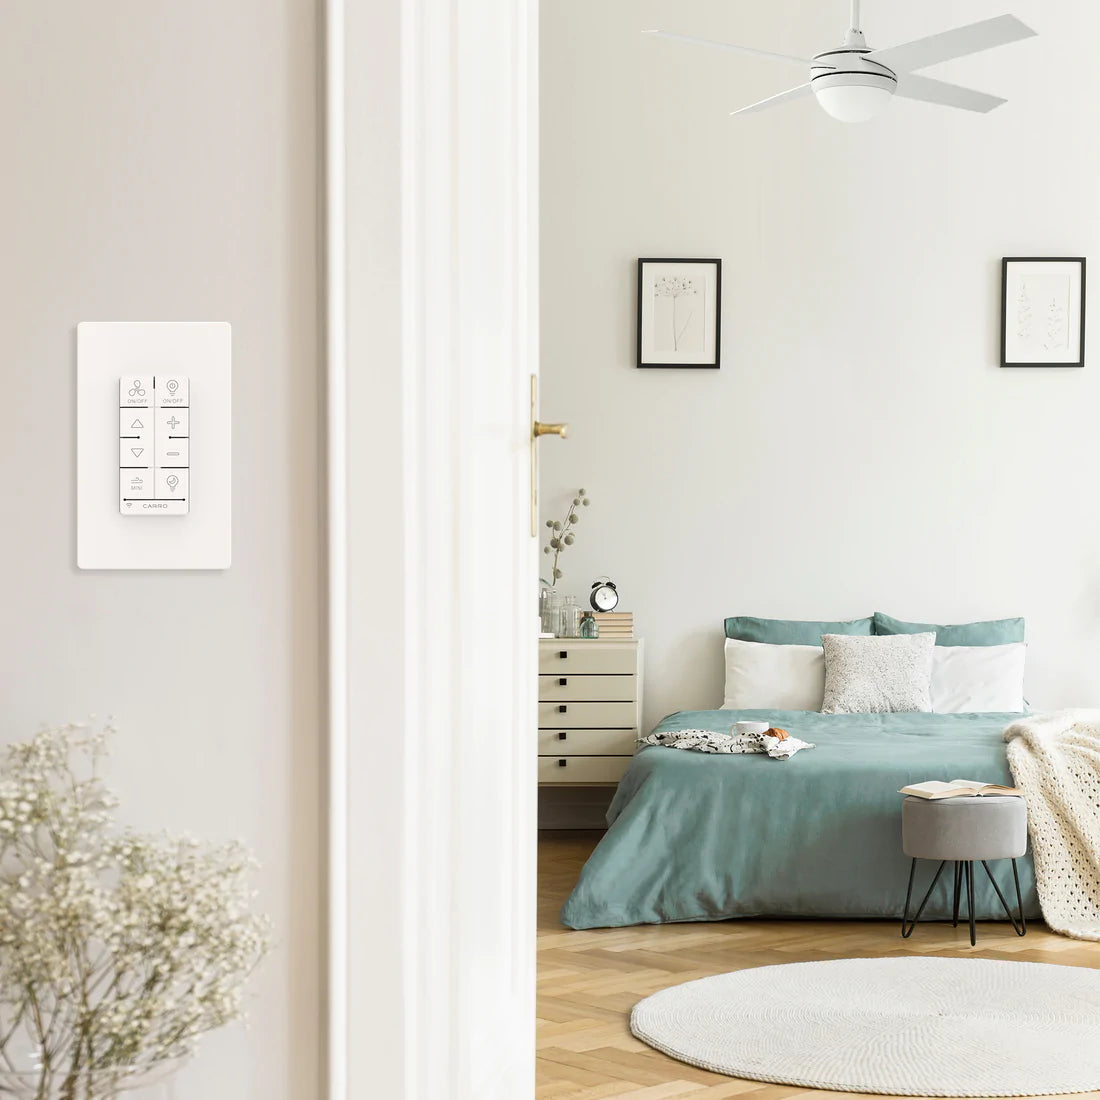 Can my existing ceiling fan use smart dimmer switch â